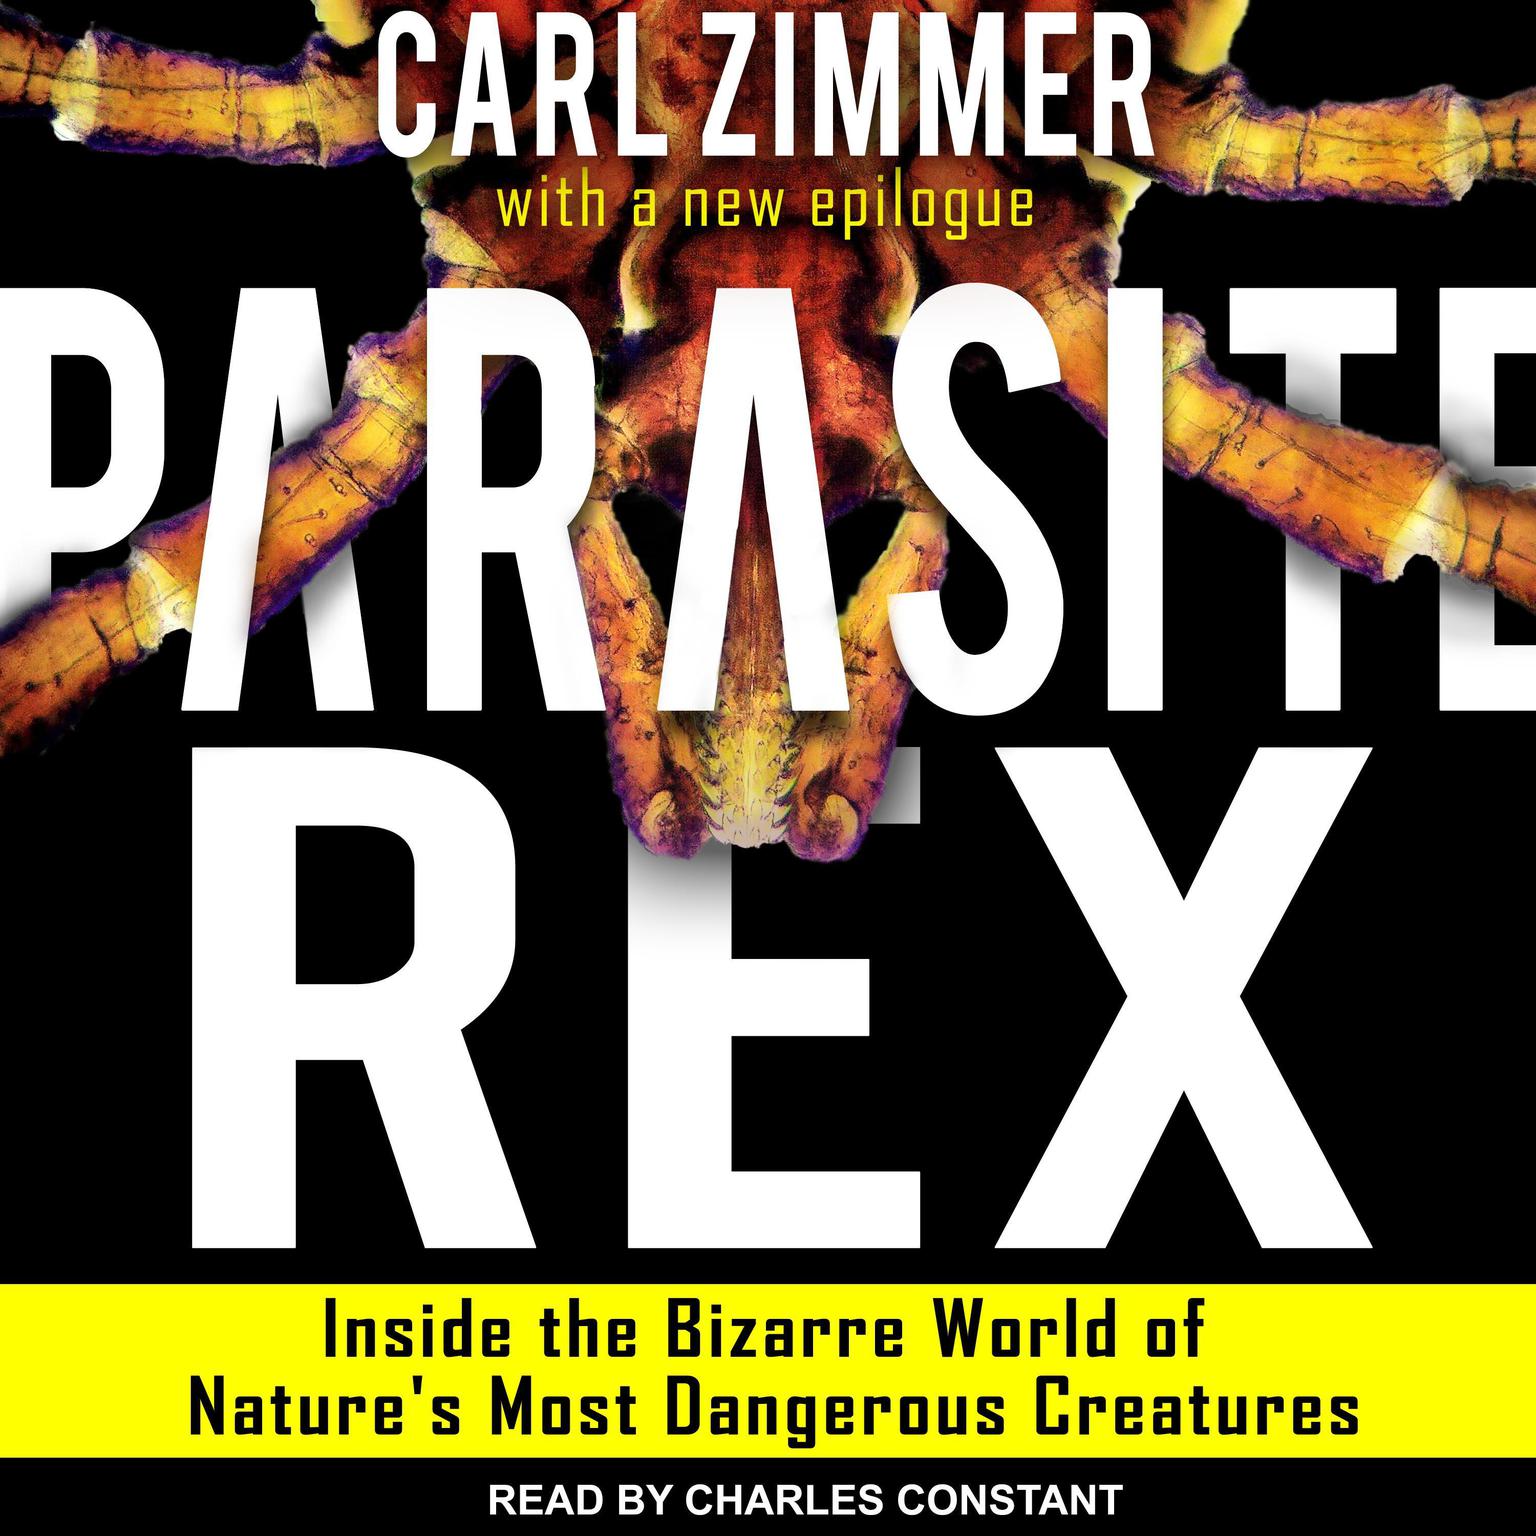 Parasite Rex: Inside the Bizarre World of Natures Most Dangerous Creatures Audiobook, by Carl Zimmer